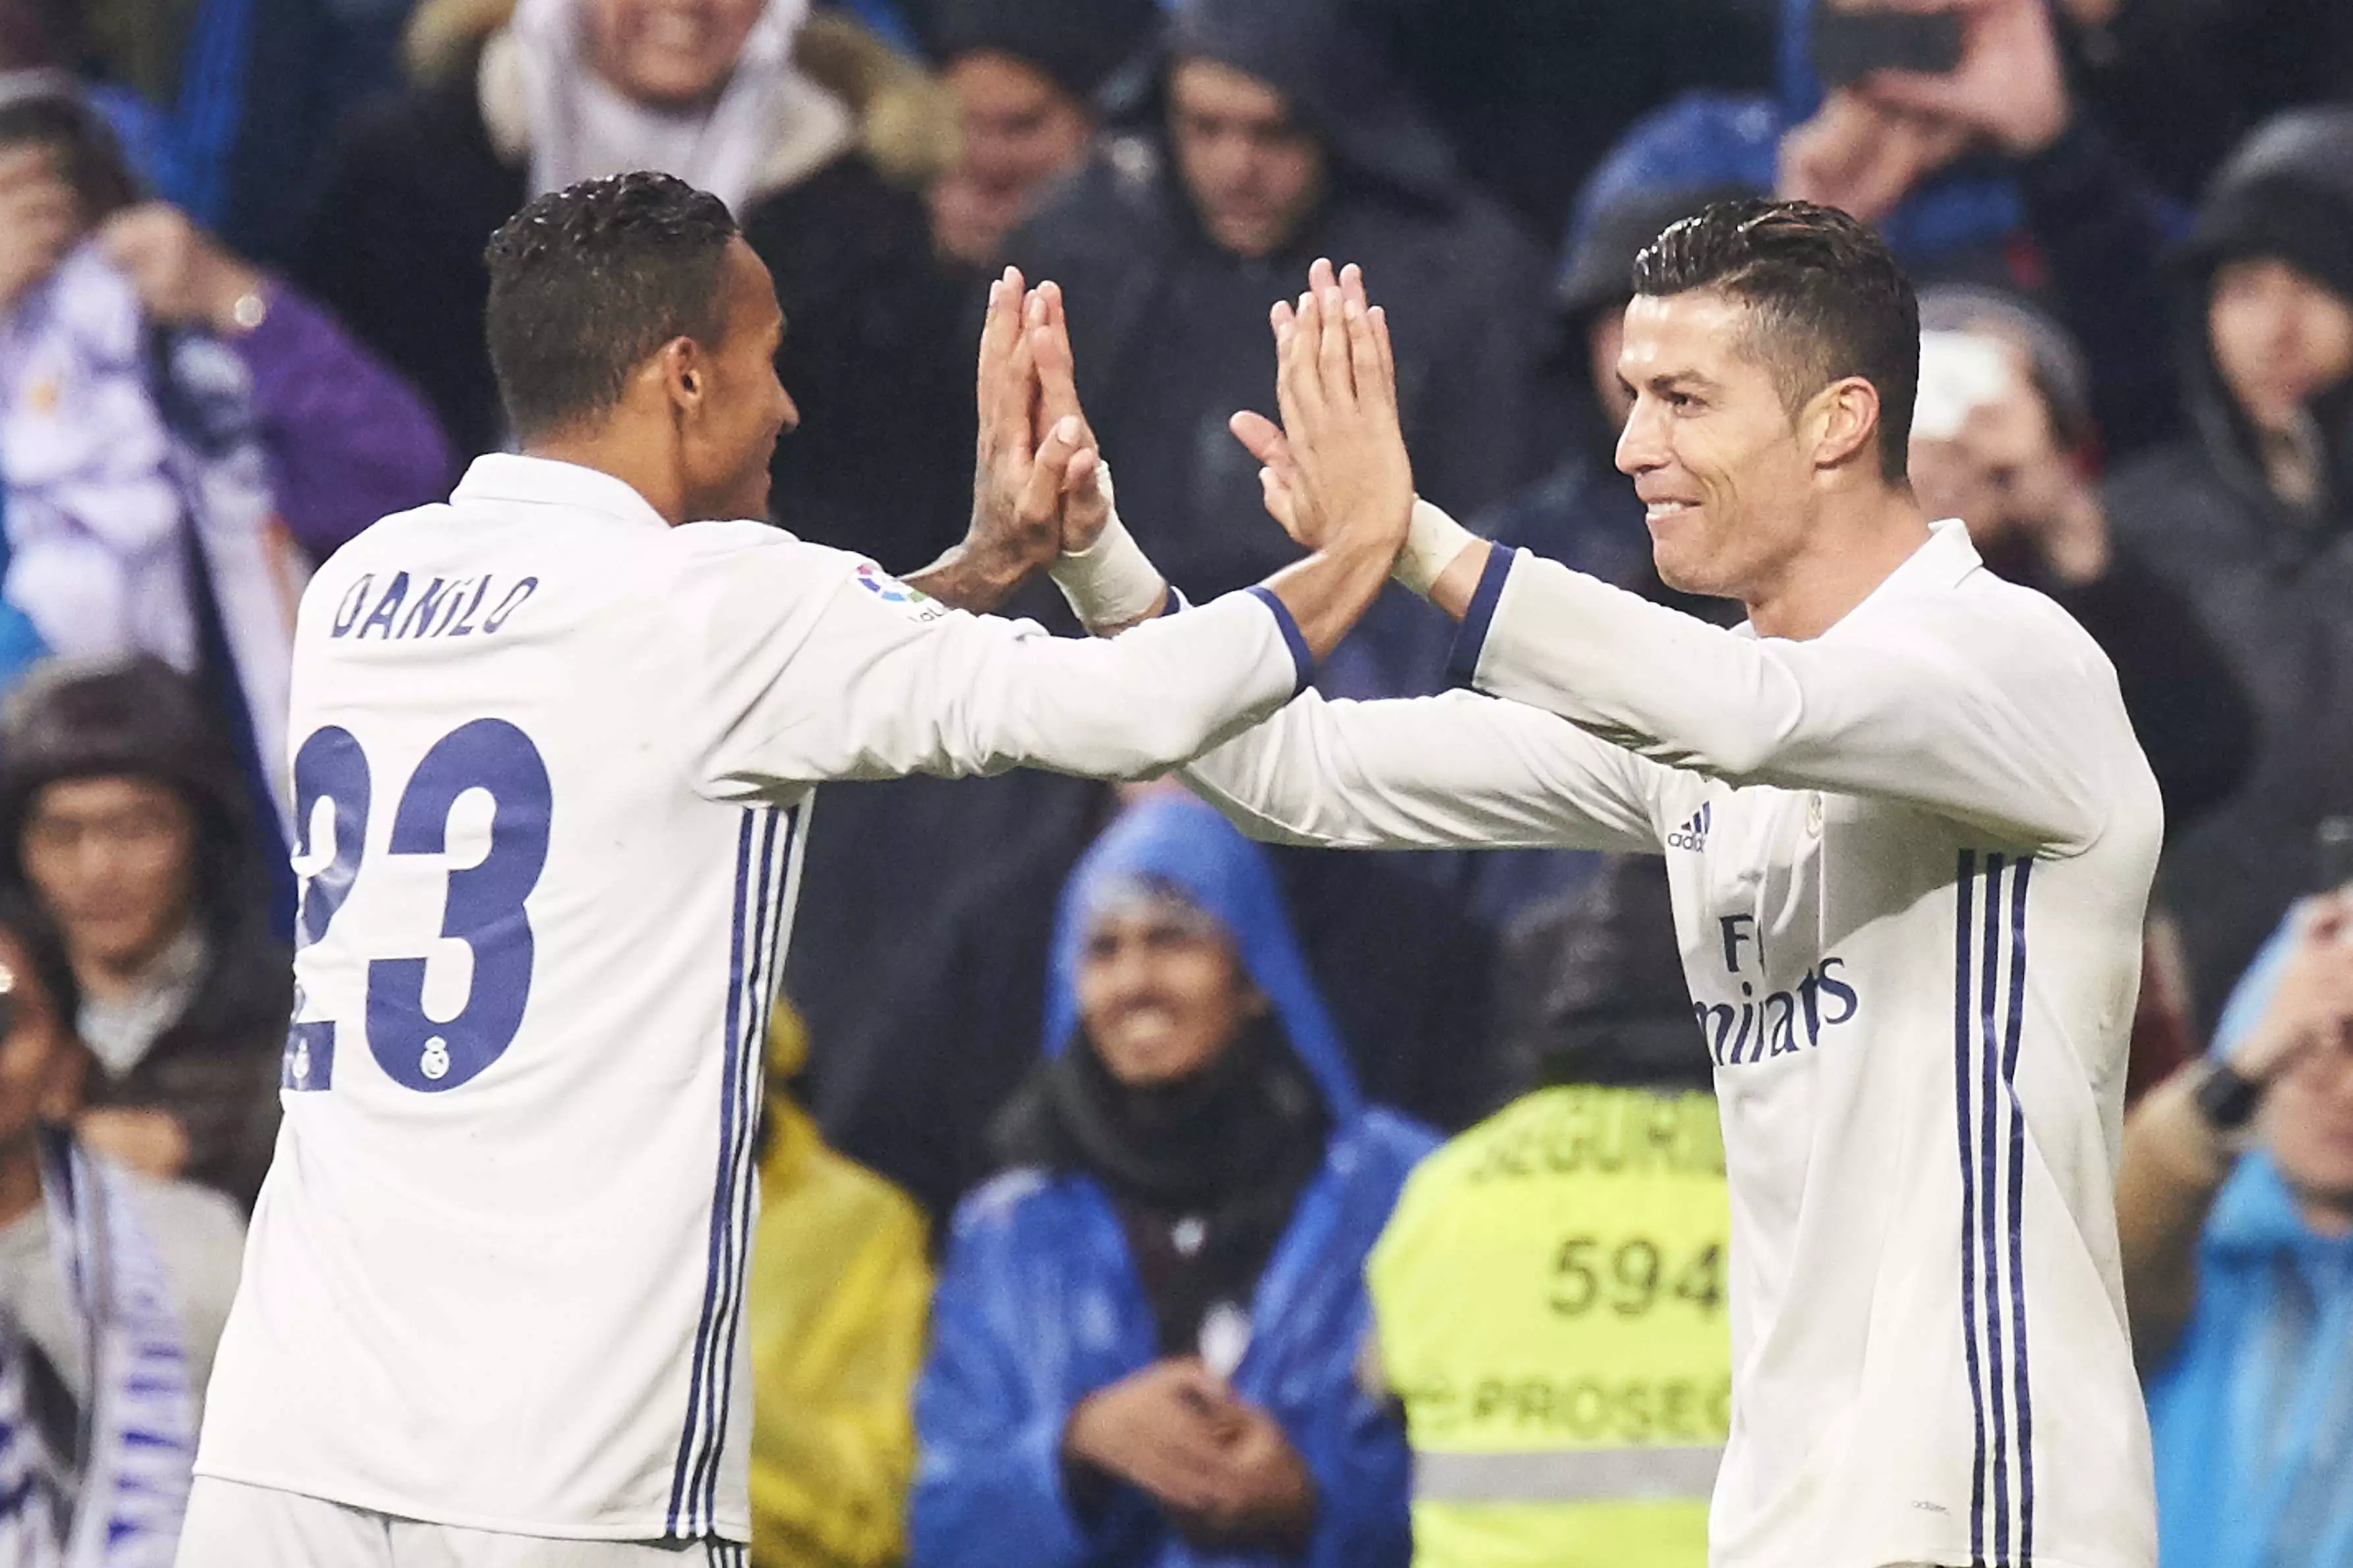 Danilo and Ronaldo together at Real. Image: PA Images